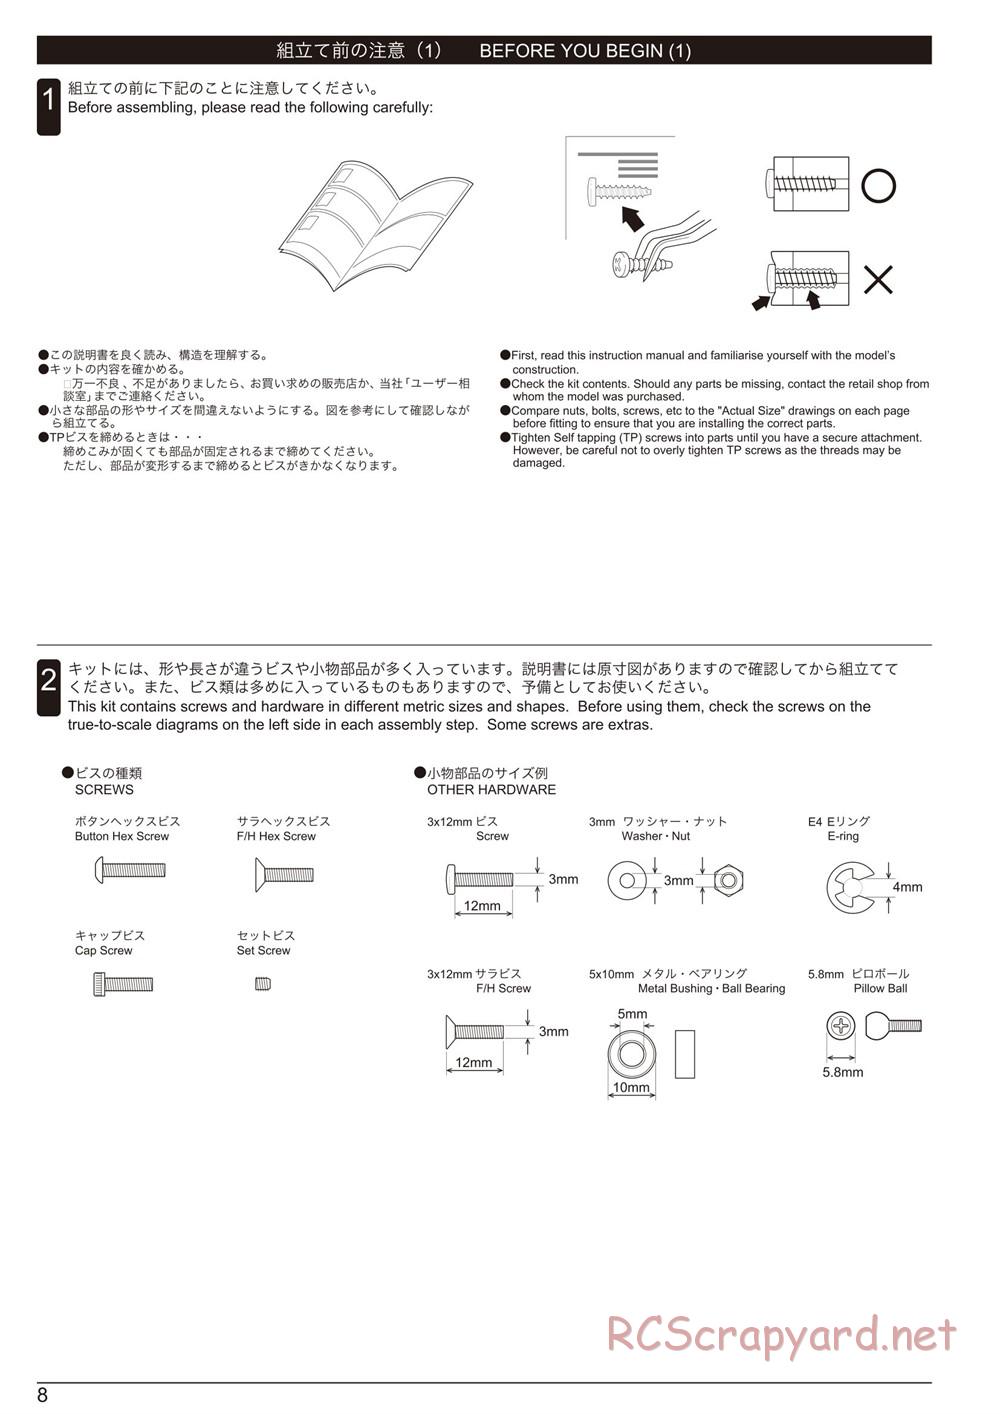 Kyosho - Ultima RB6 (2015) - Manual - Page 8